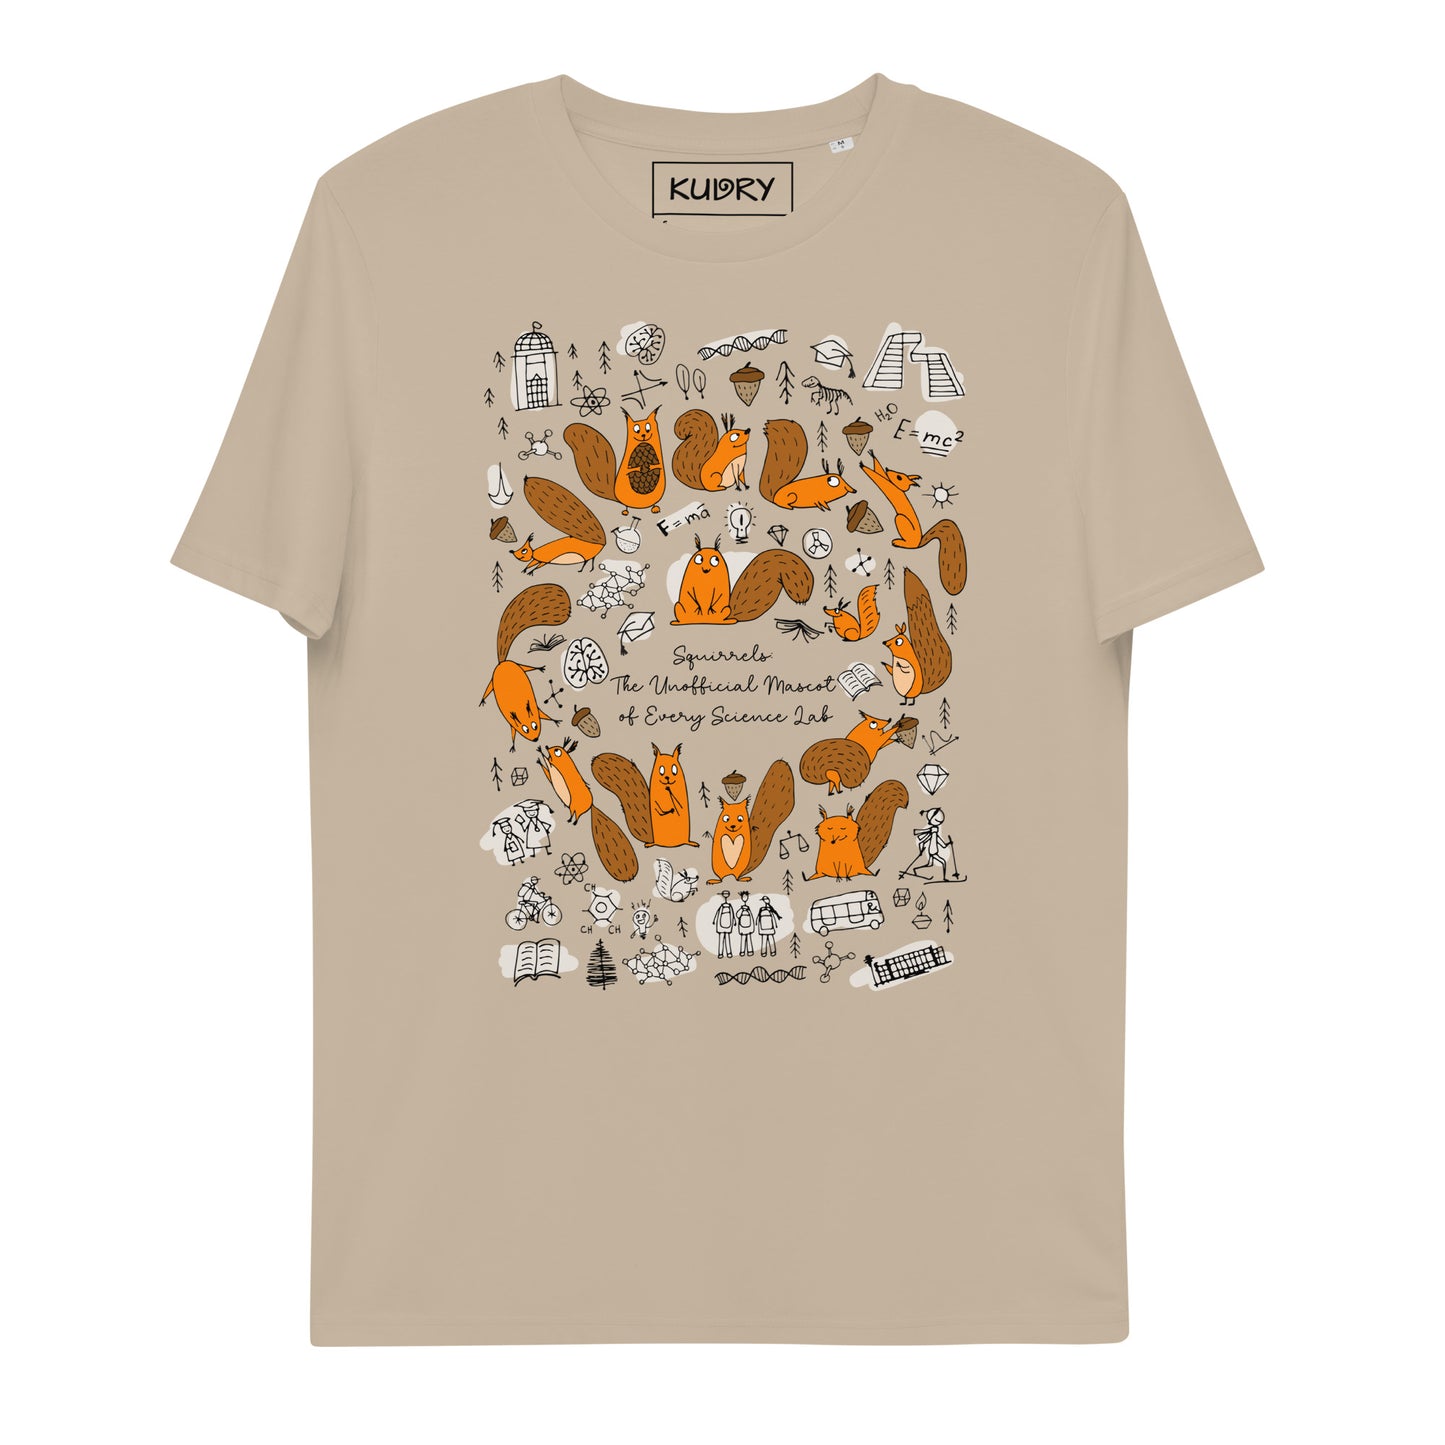 Unisex organic Cotton beige t-shirt with funny Squirrels and science design elements. Personalised t-shirt. Basic text on t-shirt "Squirrels the unofficial mascot of every lab"